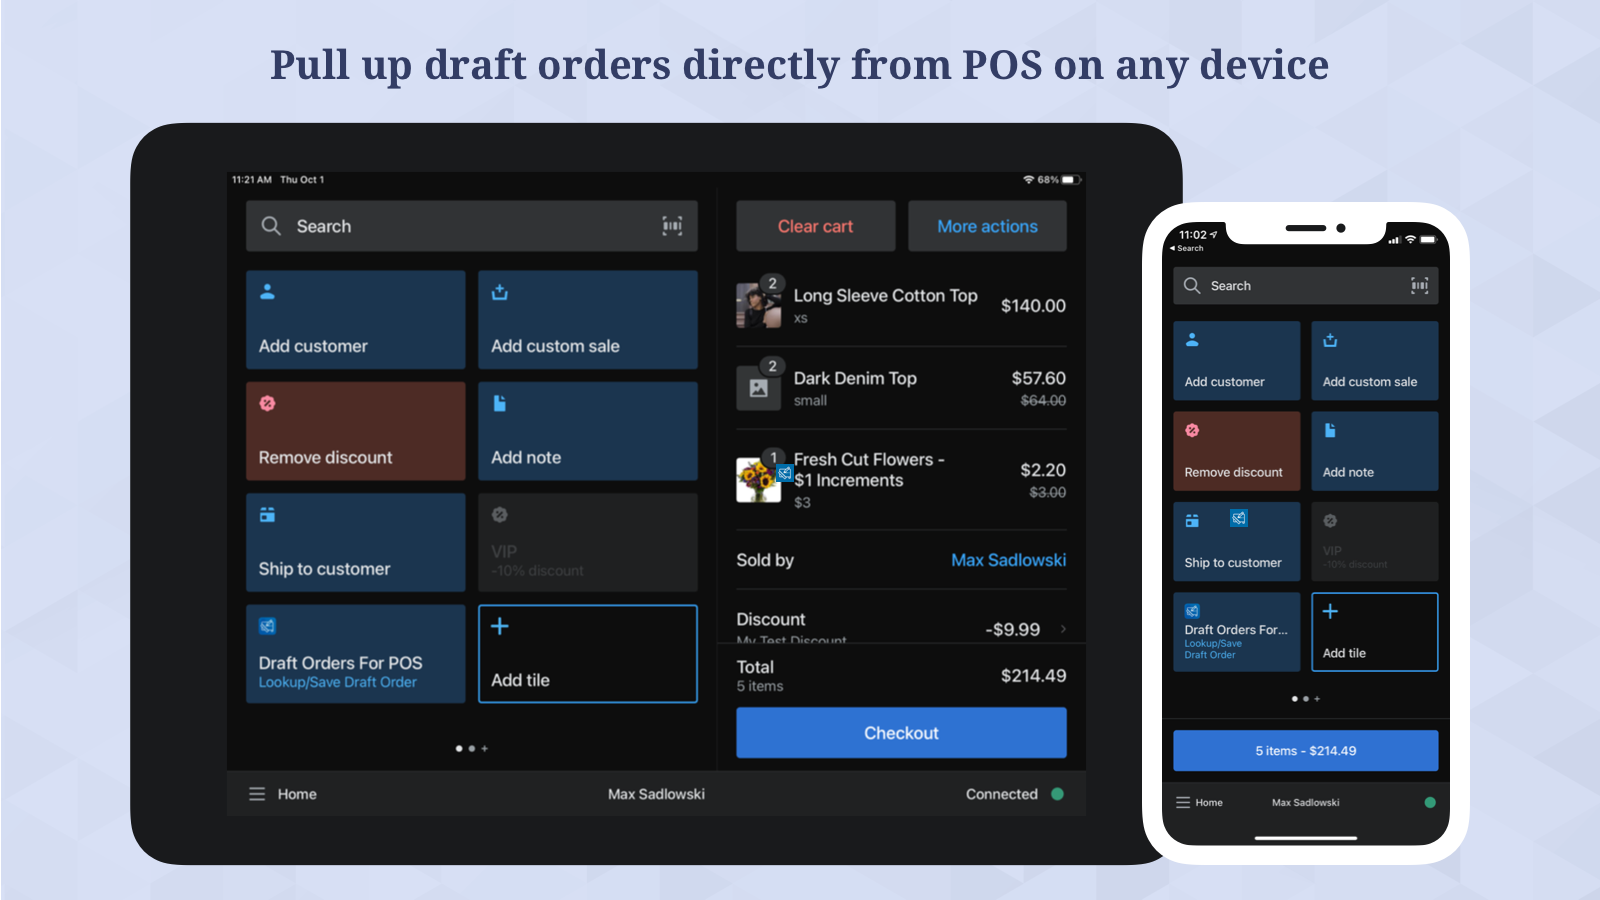 Draft Orders For POS